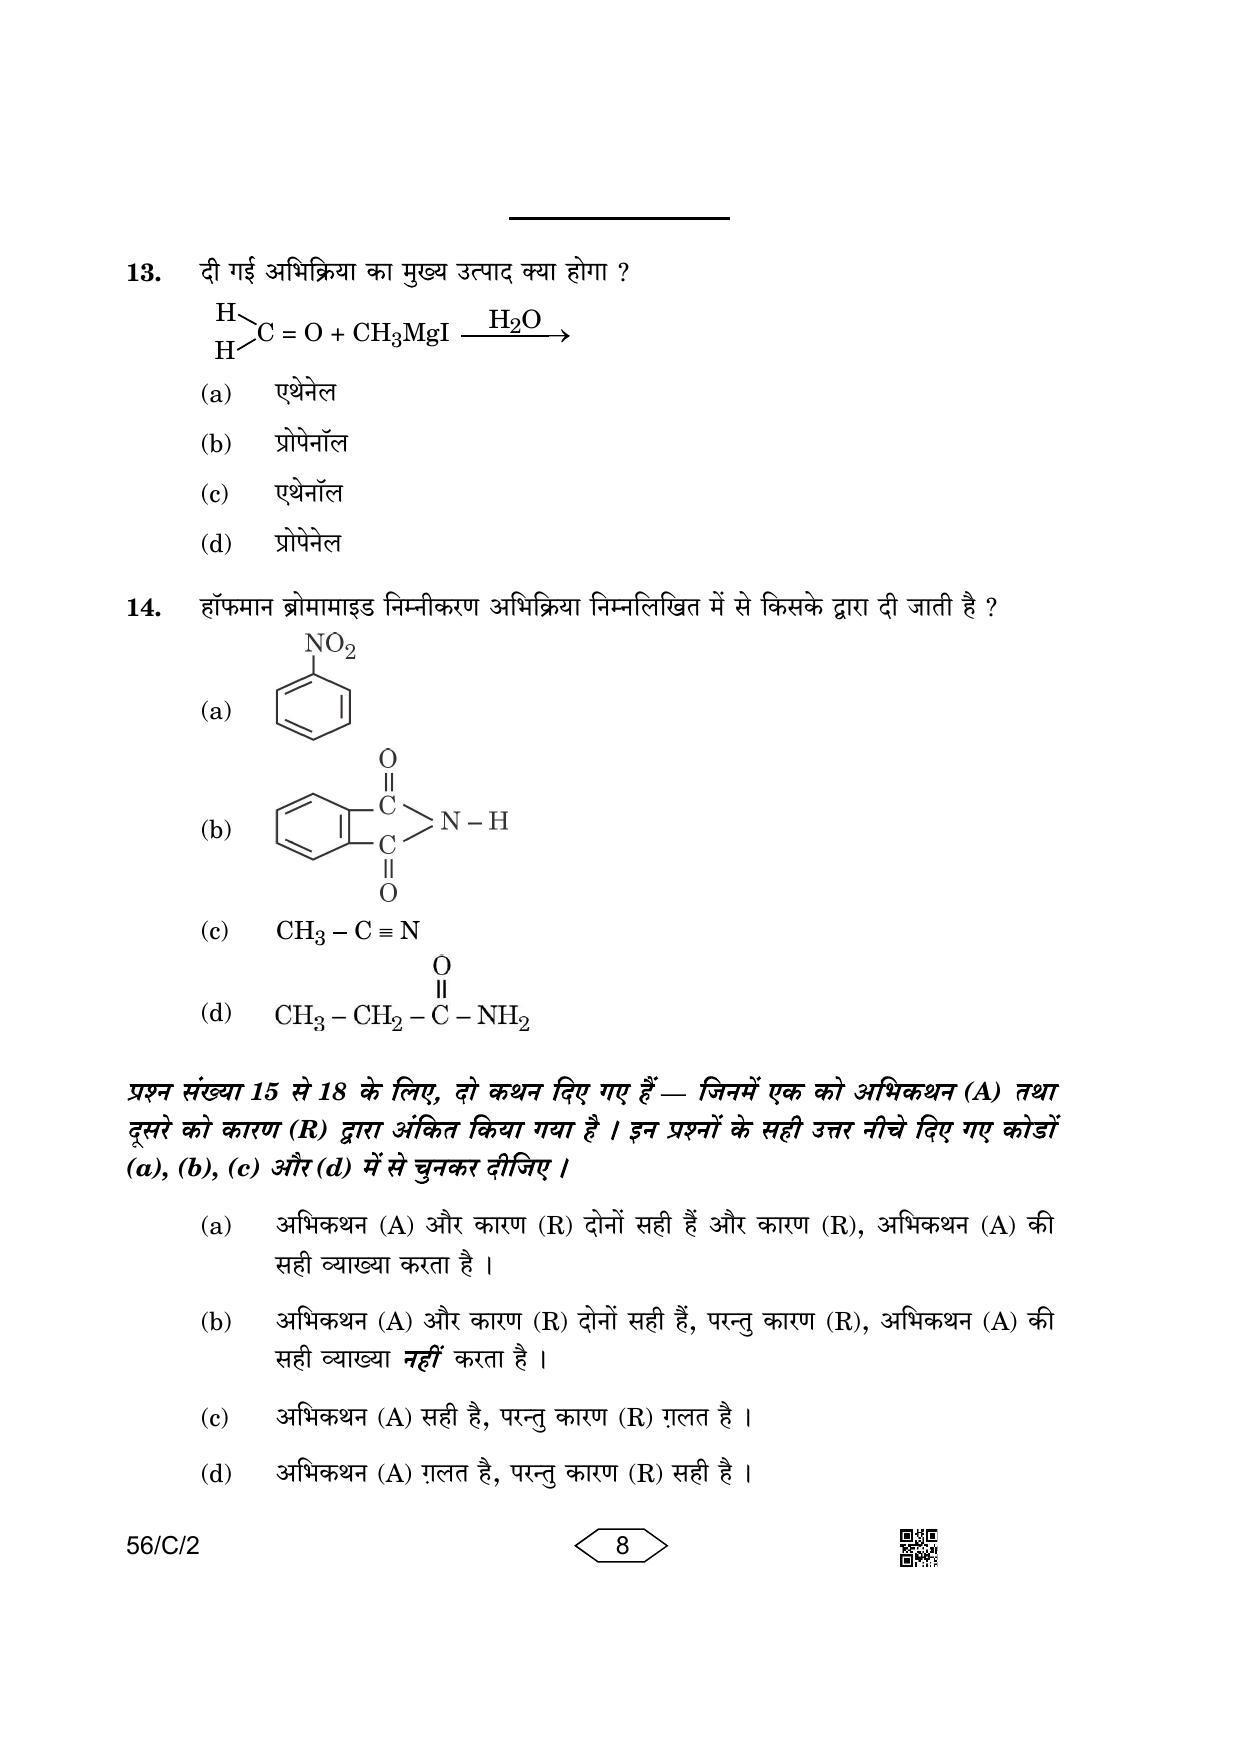 CBSE Class 12 56-2 Chemistry 2023 (Compartment) Question Paper - Page 8